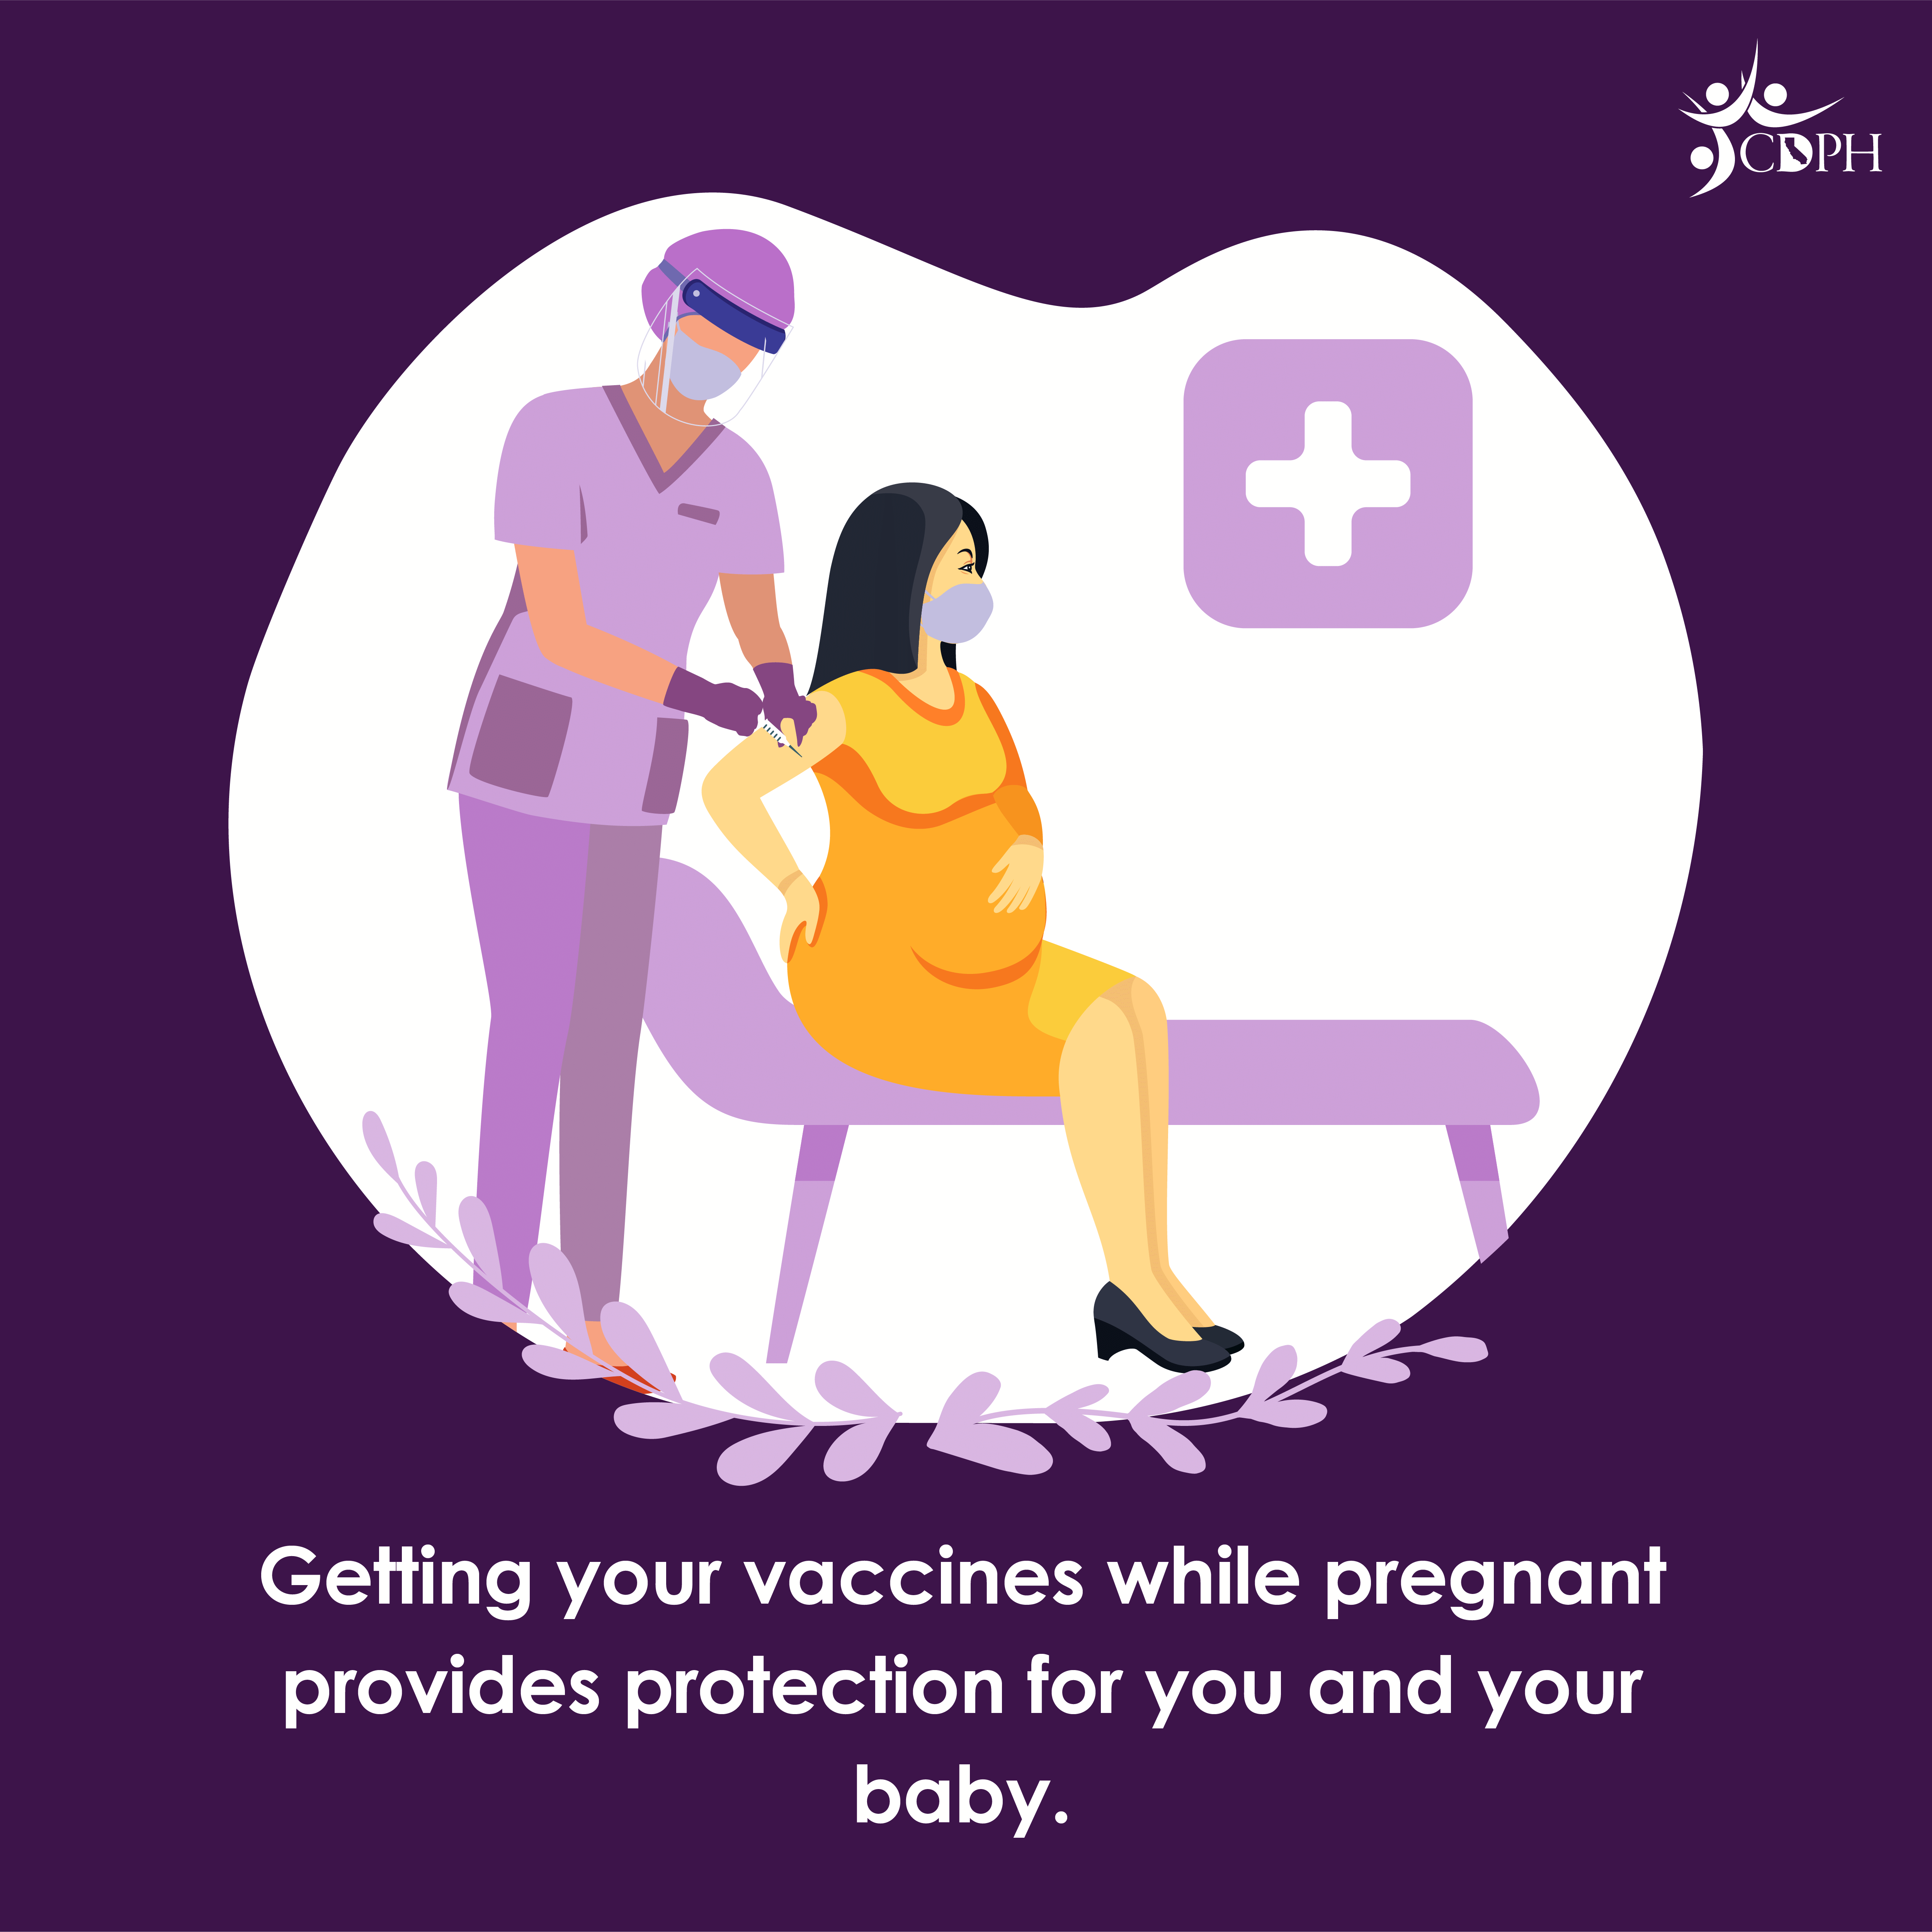 Getting your vaccines while pregnant provides protection for you and your baby